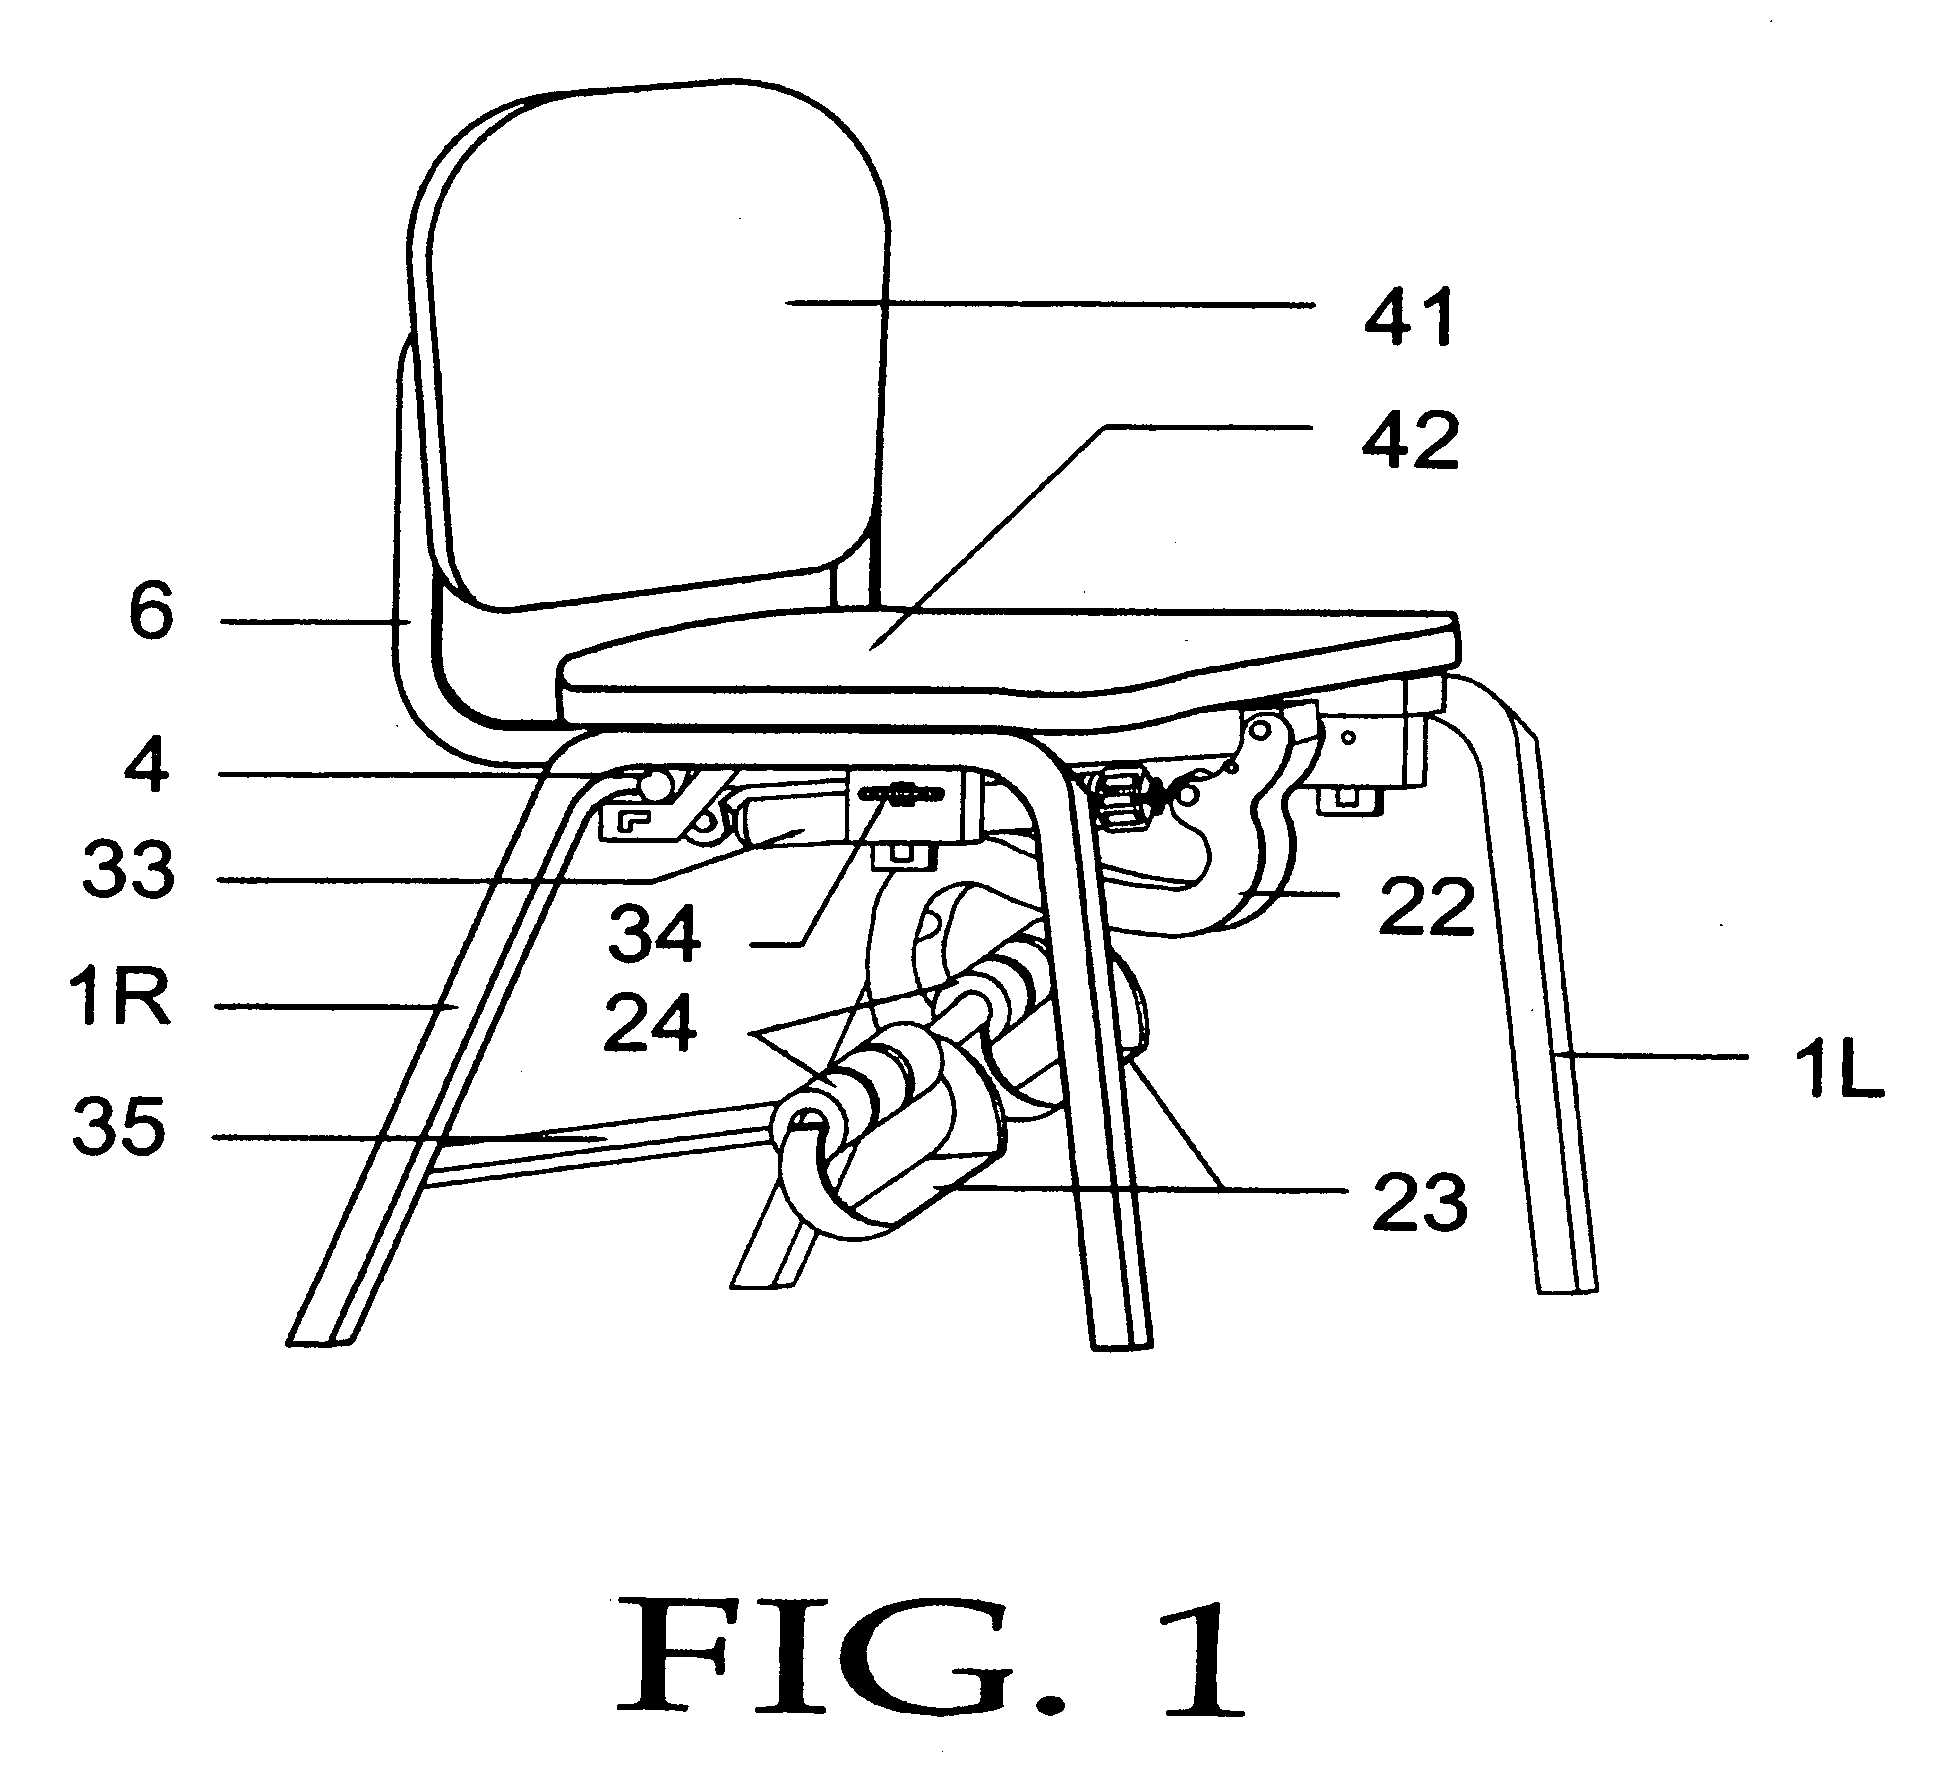 Combination chair and leg extension apparatus for obesity prophylaxis